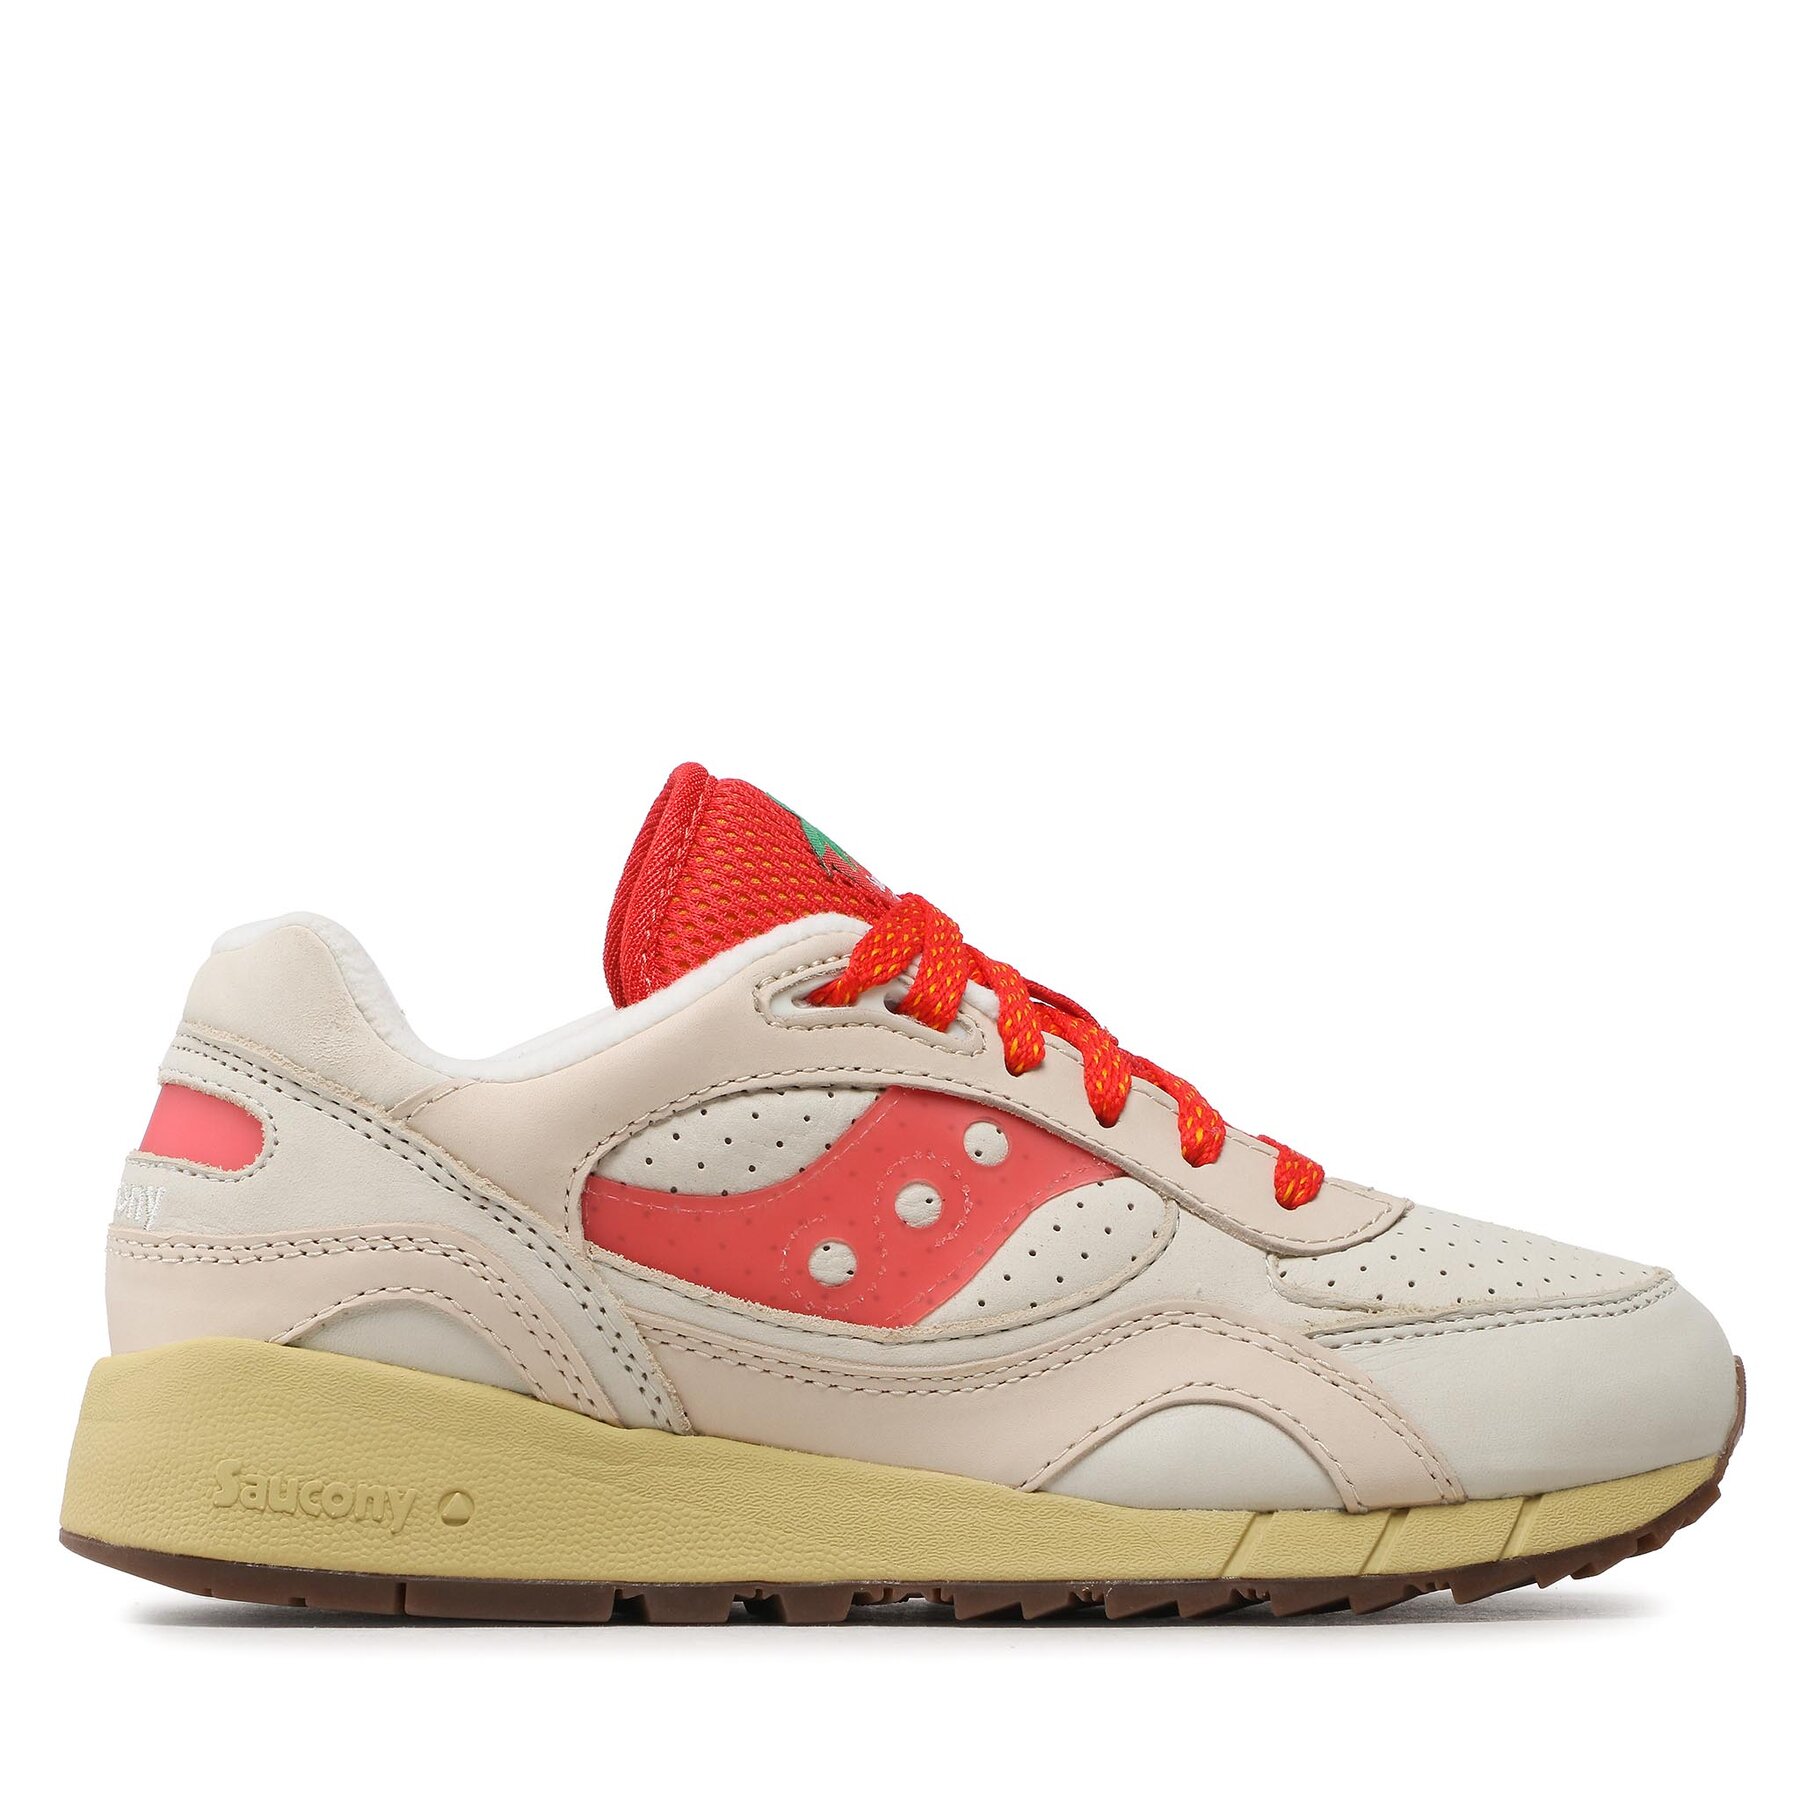 Saucony Shadow 6000 Cheesecake beige/red